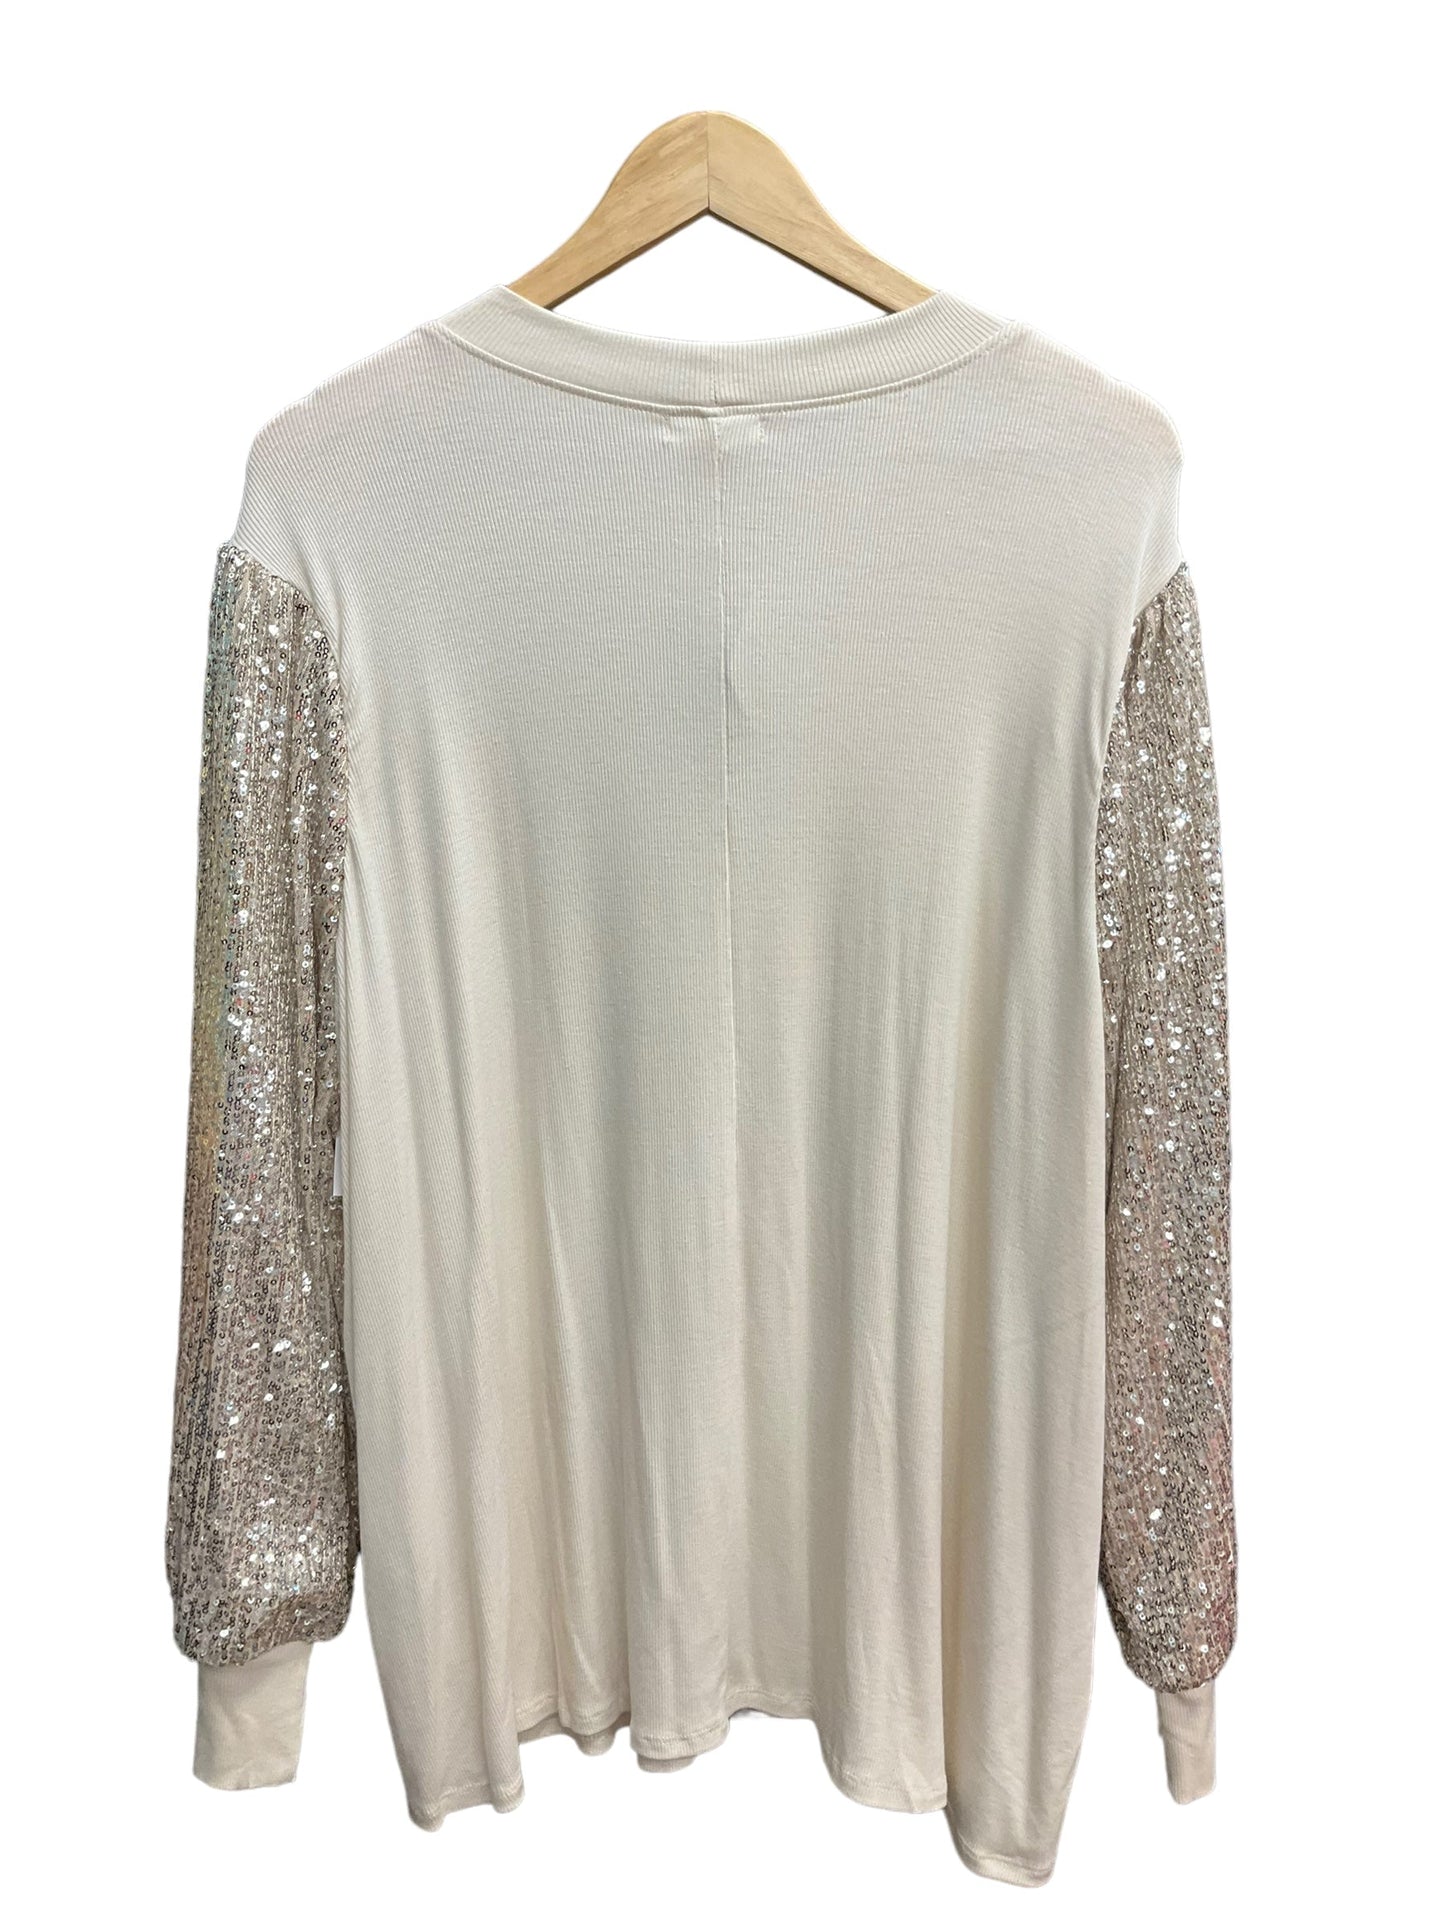 Gold Top Long Sleeve Maurices, Size 3x